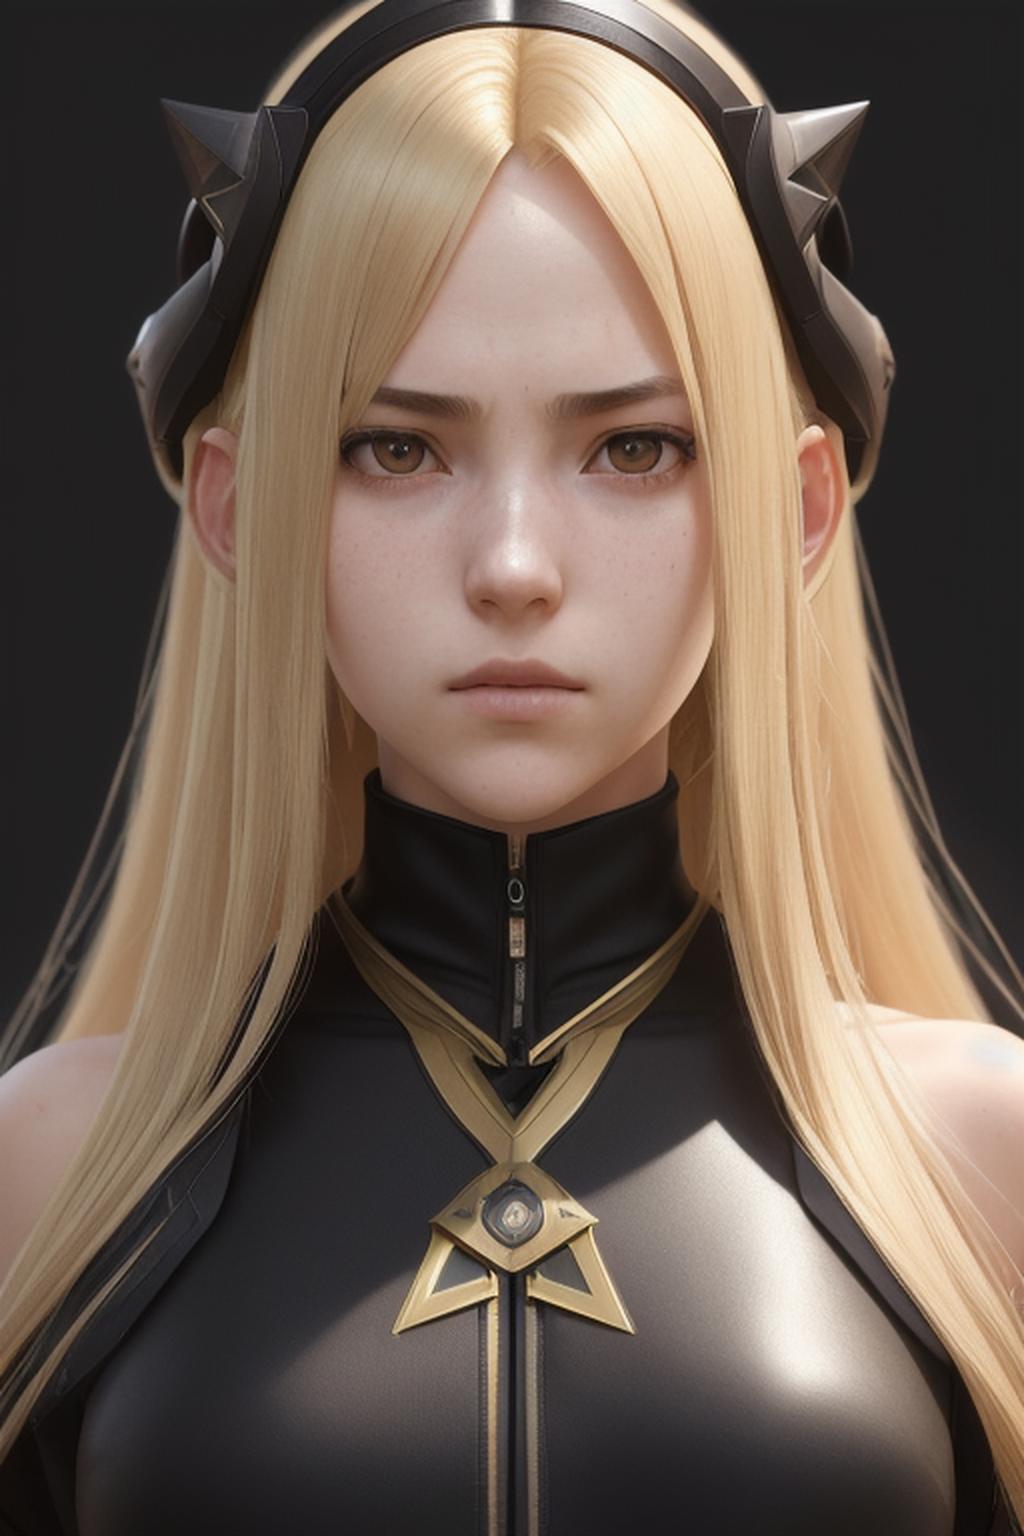 AI model image by Patchmonk